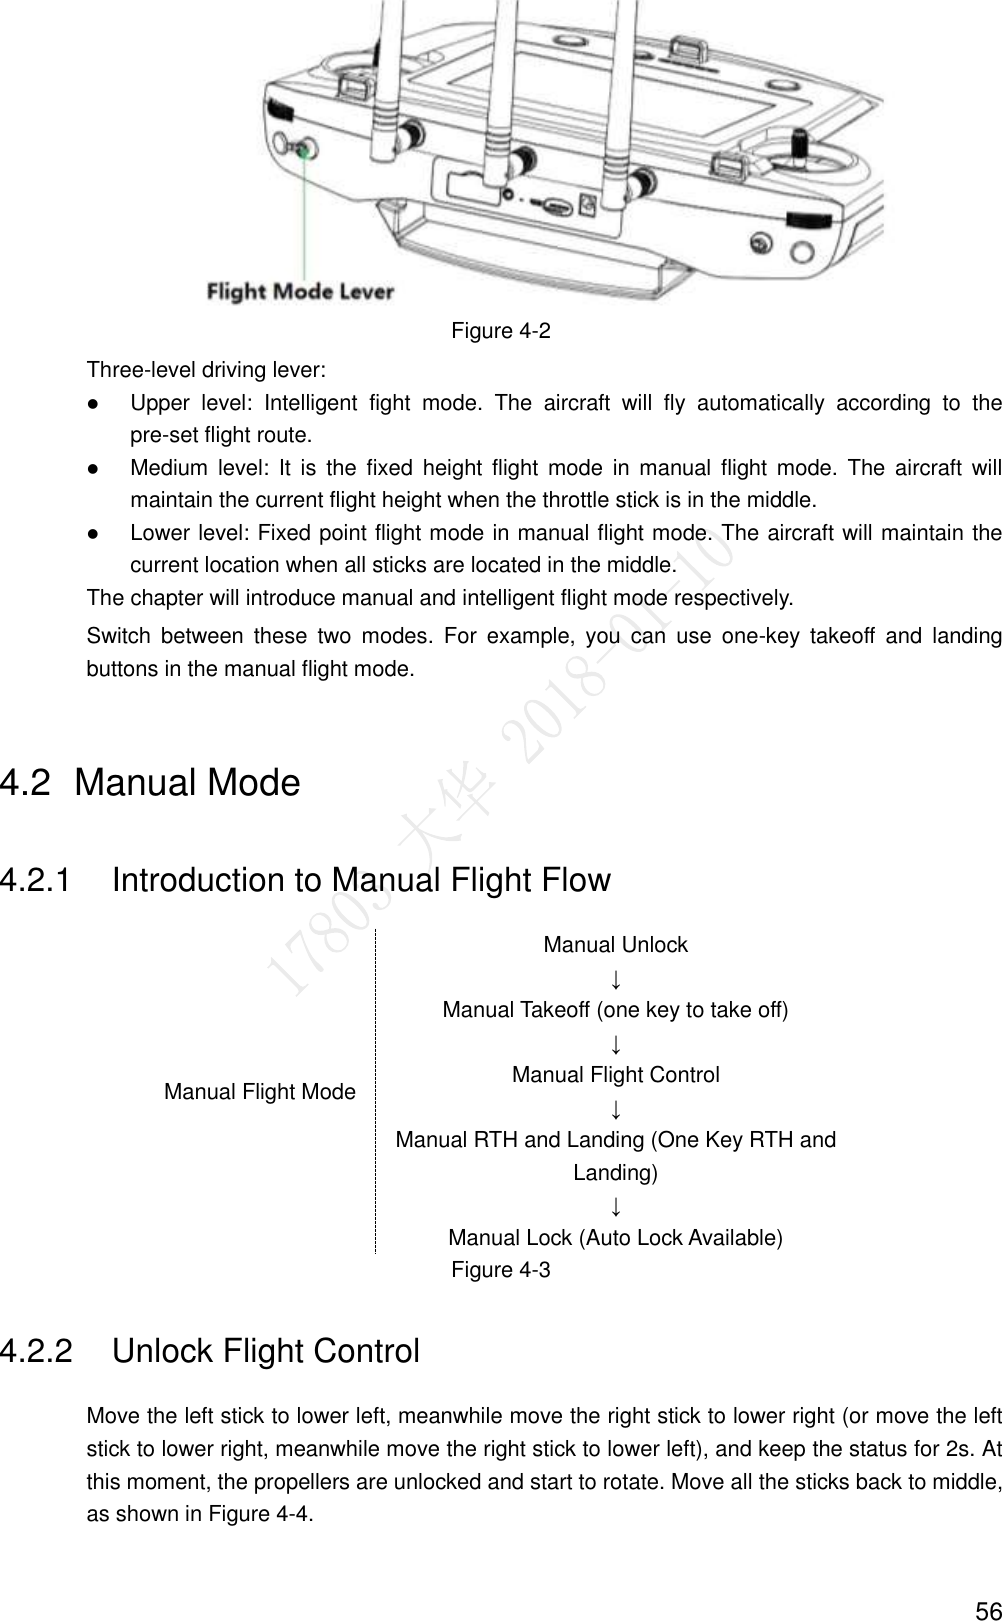  56  Figure 4-2 Three-level driving lever:  Upper  level:  Intelligent  fight  mode.  The  aircraft  will  fly  automatically  according  to  the pre-set flight route.  Medium level:  It  is  the  fixed  height  flight  mode  in manual  flight mode.  The  aircraft  will maintain the current flight height when the throttle stick is in the middle.  Lower level: Fixed point flight mode in manual flight mode. The aircraft will maintain the current location when all sticks are located in the middle. The chapter will introduce manual and intelligent flight mode respectively. Switch  between  these  two  modes.  For  example,  you  can  use  one-key  takeoff  and  landing buttons in the manual flight mode. 4.2  Manual Mode 4.2.1  Introduction to Manual Flight Flow Manual Flight Mode Manual Unlock ↓ Manual Takeoff (one key to take off) ↓ Manual Flight Control ↓ Manual RTH and Landing (One Key RTH and Landing) ↓ Manual Lock (Auto Lock Available) Figure 4-3 4.2.2  Unlock Flight Control Move the left stick to lower left, meanwhile move the right stick to lower right (or move the left stick to lower right, meanwhile move the right stick to lower left), and keep the status for 2s. At this moment, the propellers are unlocked and start to rotate. Move all the sticks back to middle, as shown in Figure 4-4. 